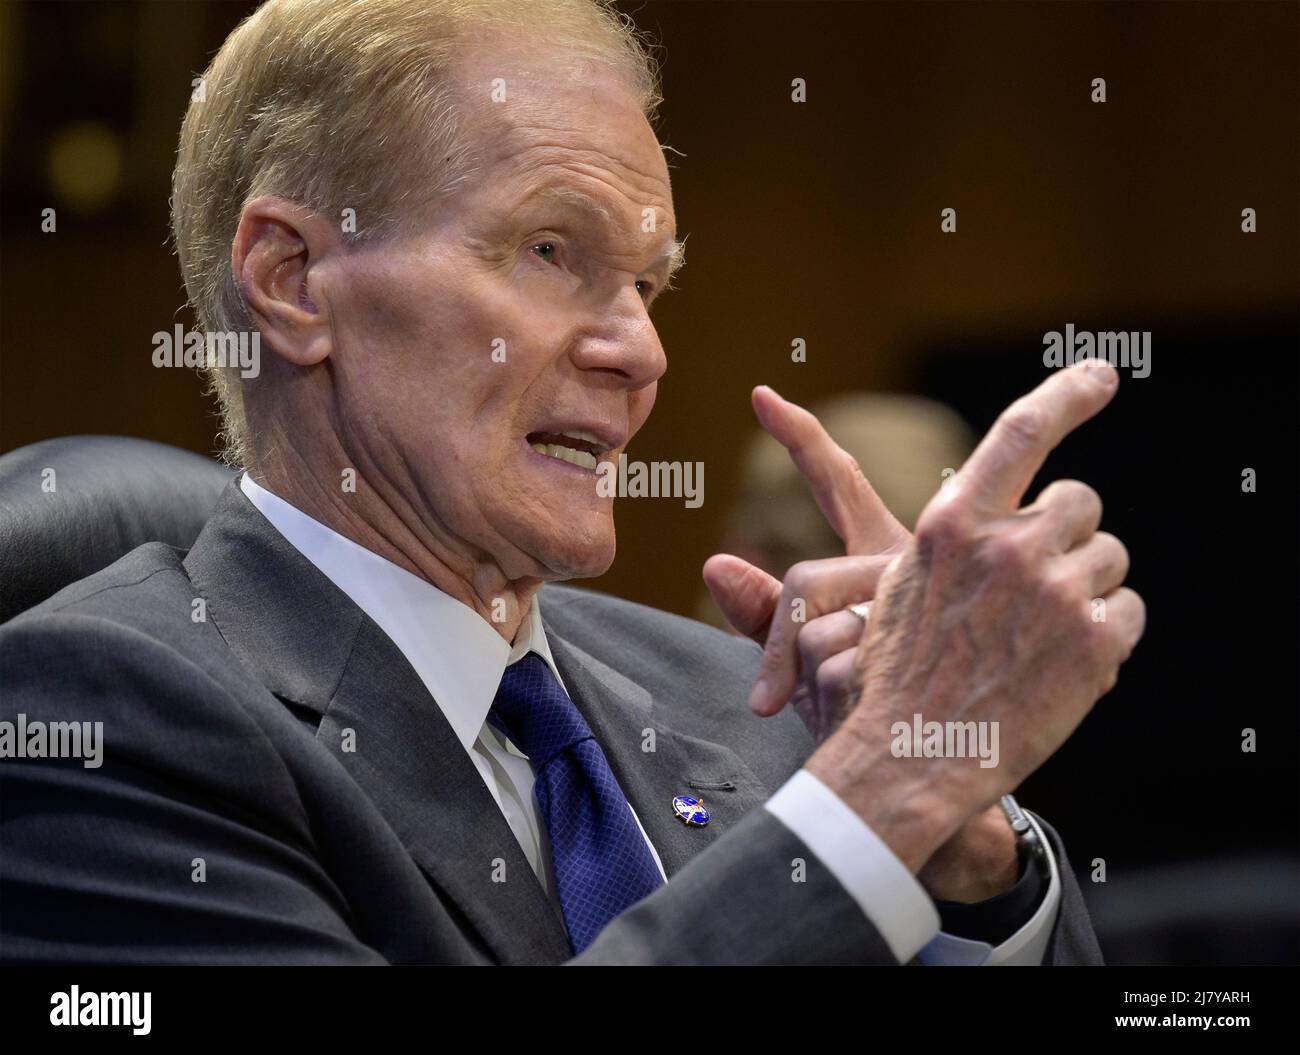 NASA Administrator Bill Nelson, testifies before the Senate Appropriations Commerce, Justice, Science, and Related Agencies subcommittee during the FY 2023 budget hearing, at the Dirksen Senate Office Building, May 3, 2022, in Washington, D.C. Stock Photo